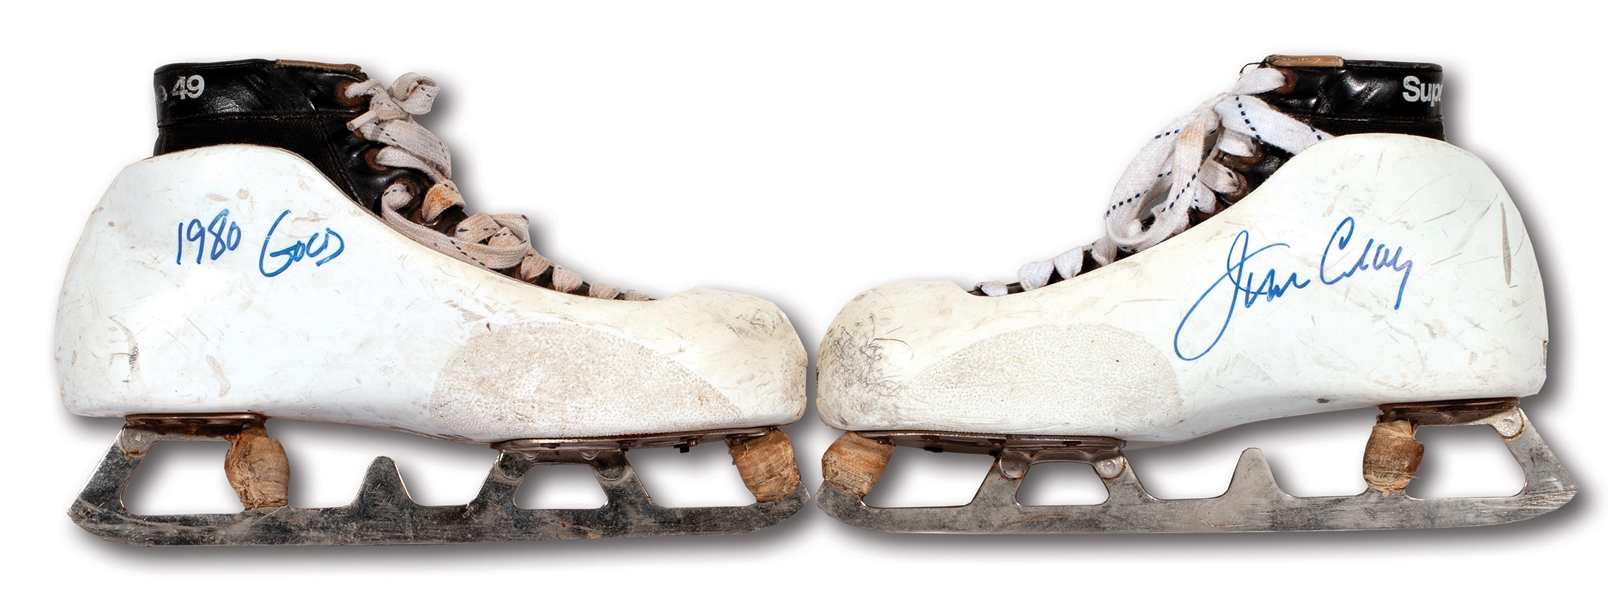 JIM CRAIGS SIGNED & INSCRIBED 1980 OLYMPICS "MIRACLE ON ICE" GOALIE SKATES WORN EVERY GAME OF USAS EPIC GOLD MEDAL RUN IN LAKE PLACID (CRAIG LOA)